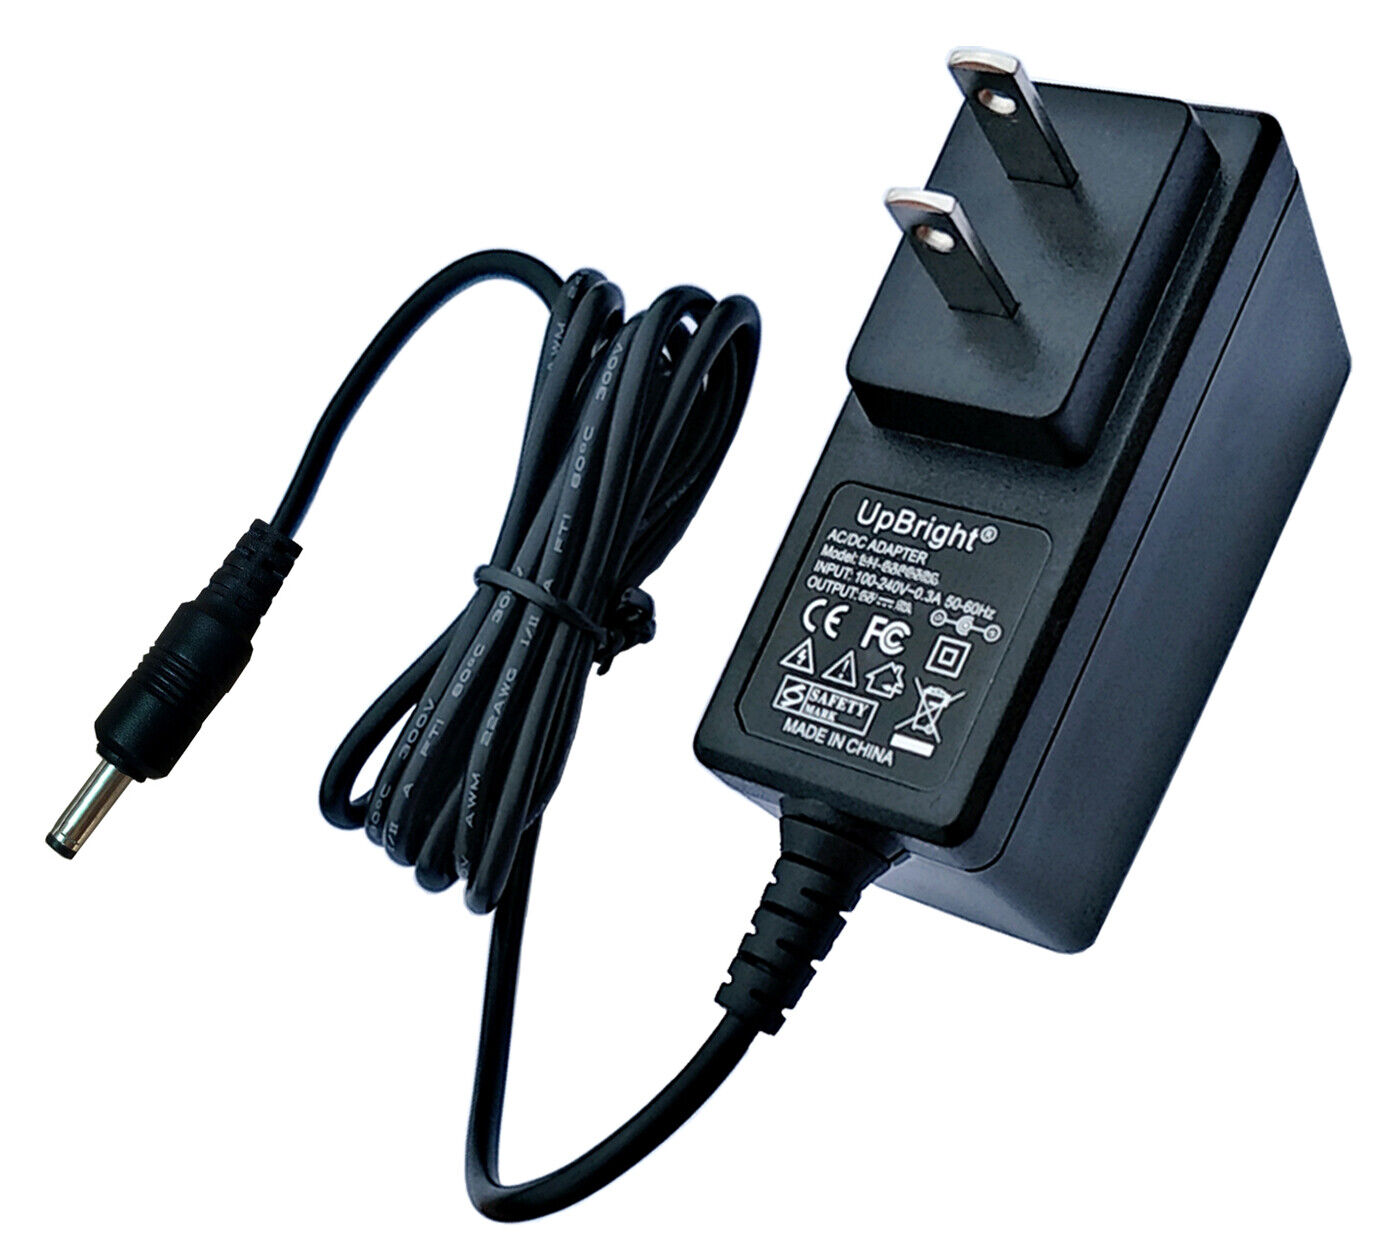 AC Adapter For Harbor Freight Tools Bunker Hill Security Camera 62368 DC Charger